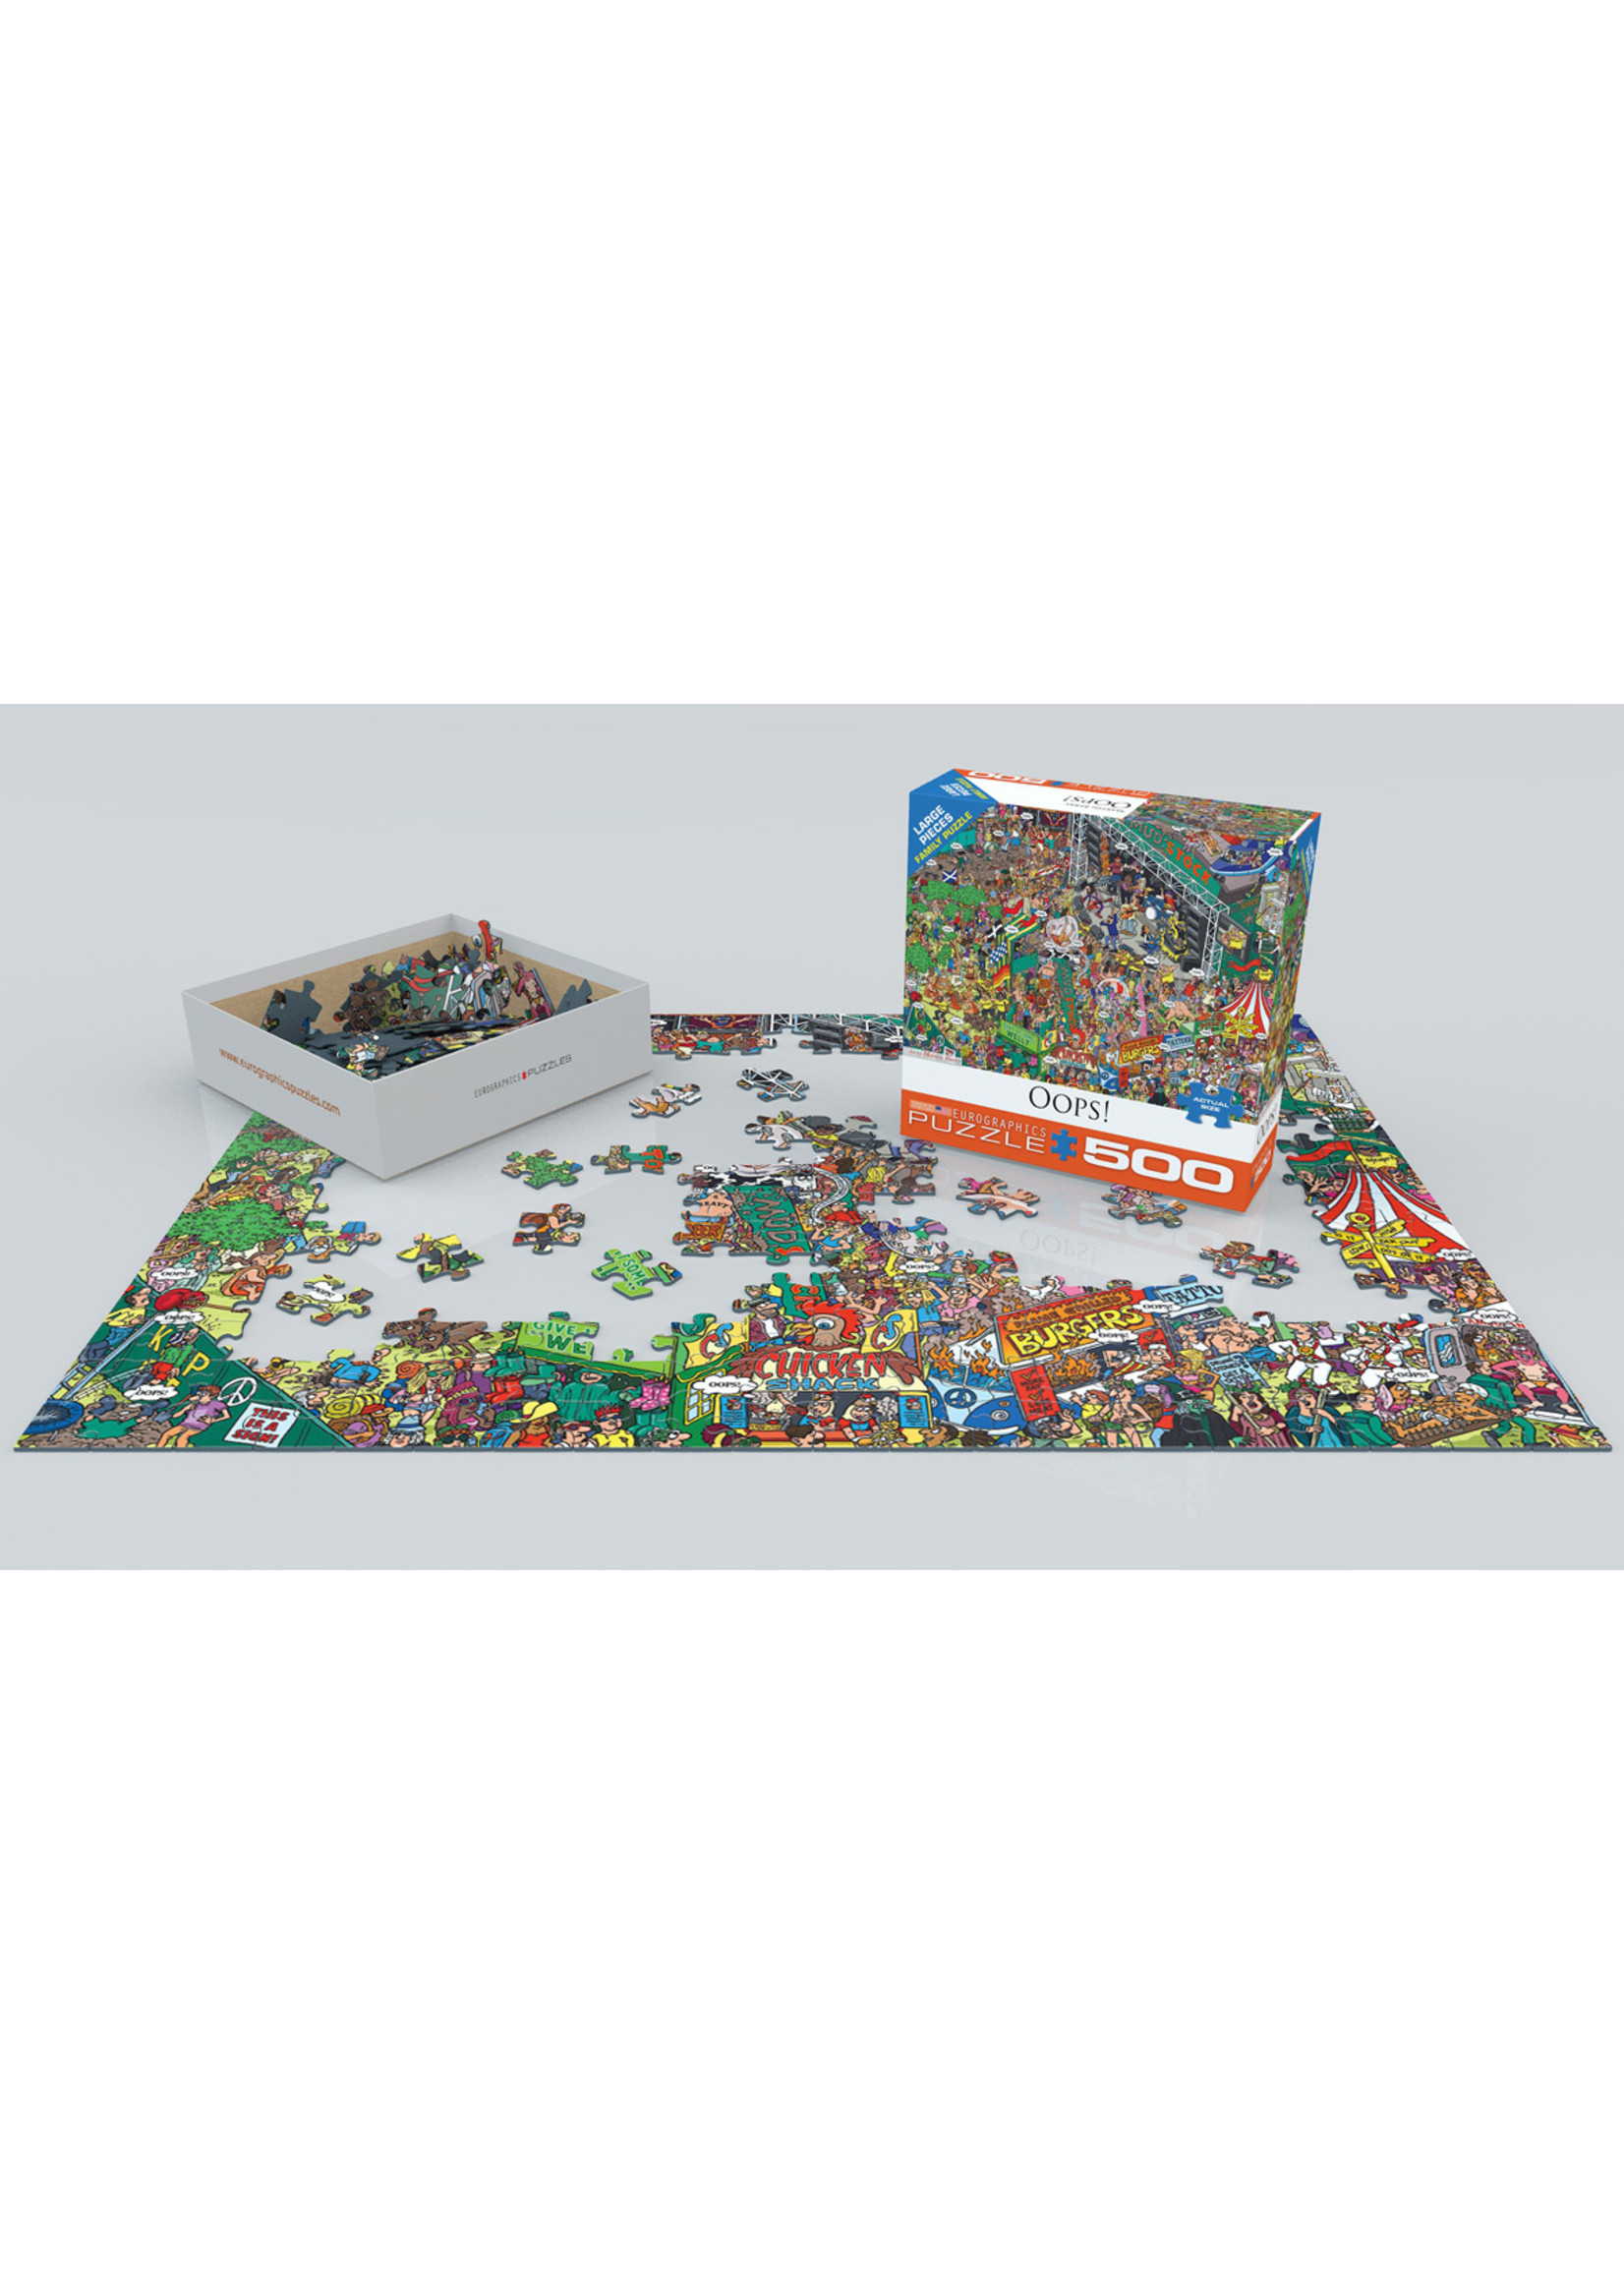 Eurographics Oops! - 500 Piece Puzzle